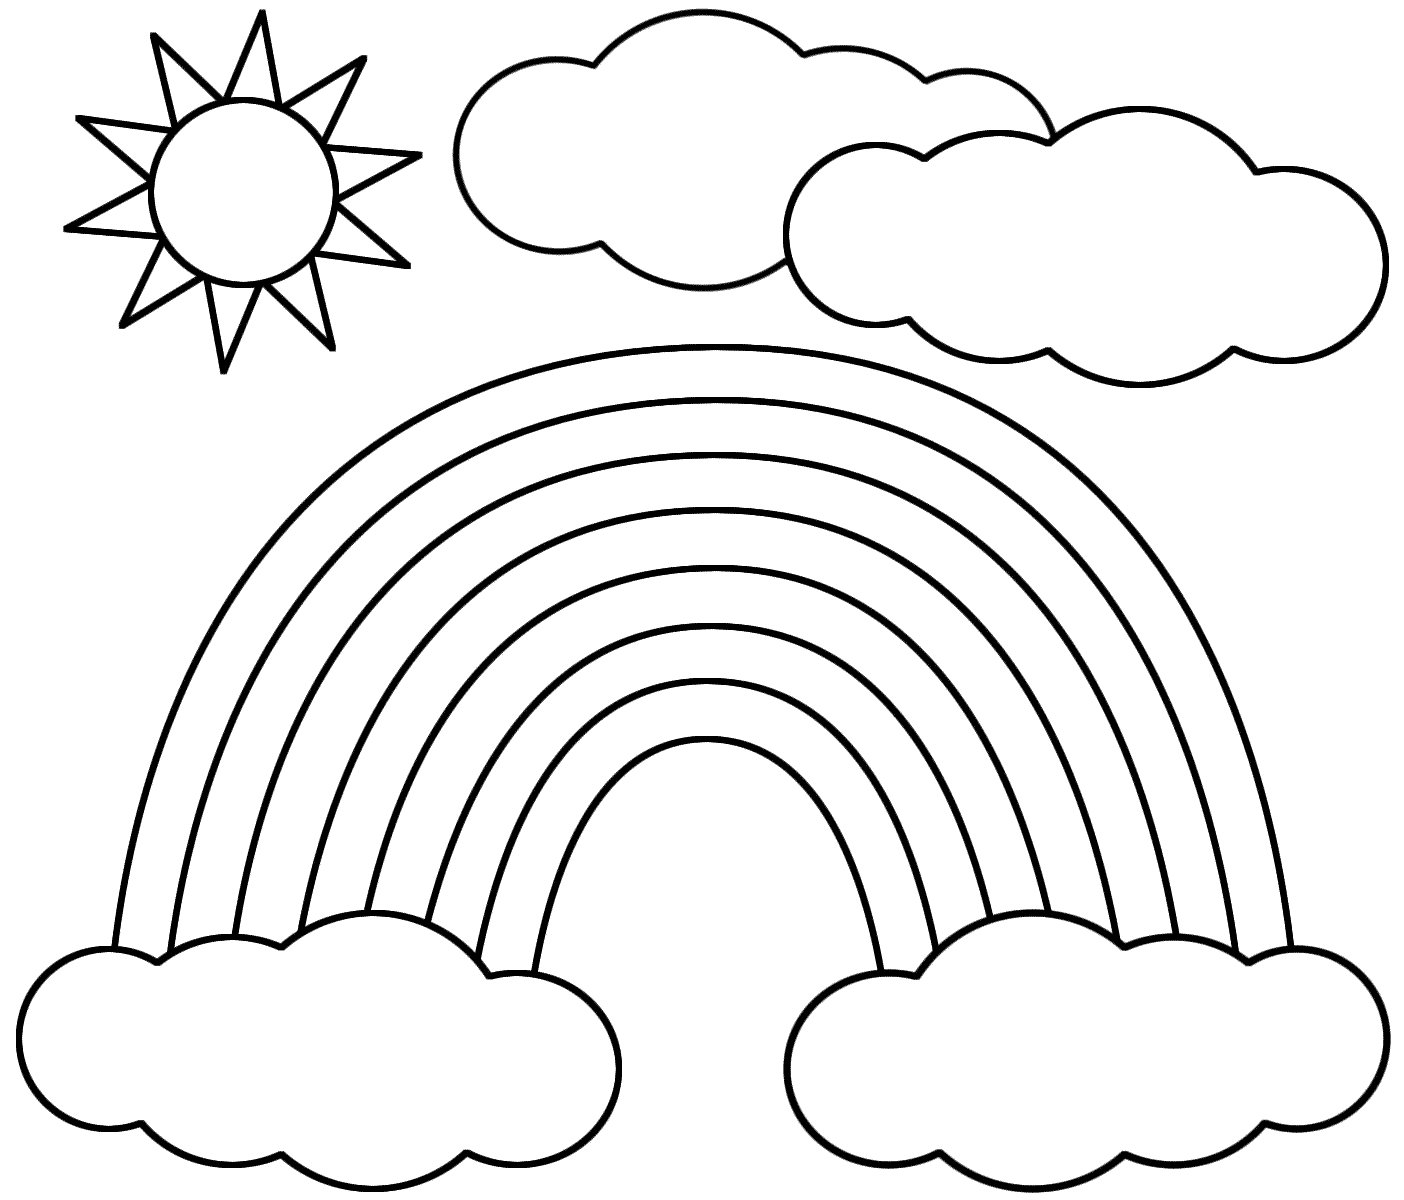 Sun Coloring Pages - Coloring Kids